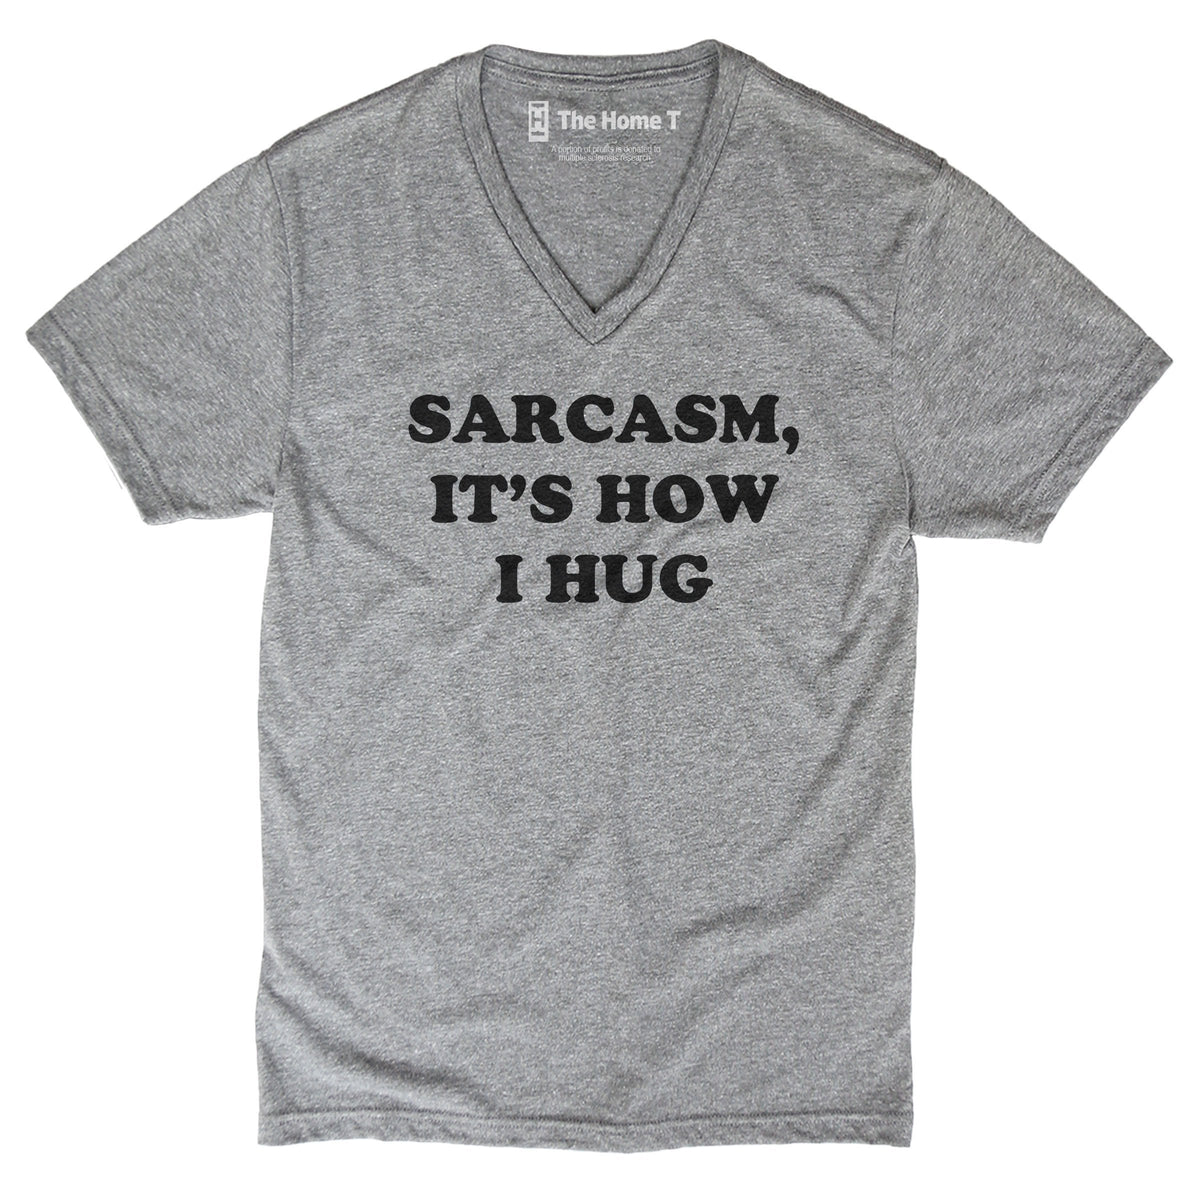 Sarcasm, It's How I Hug The Home T 